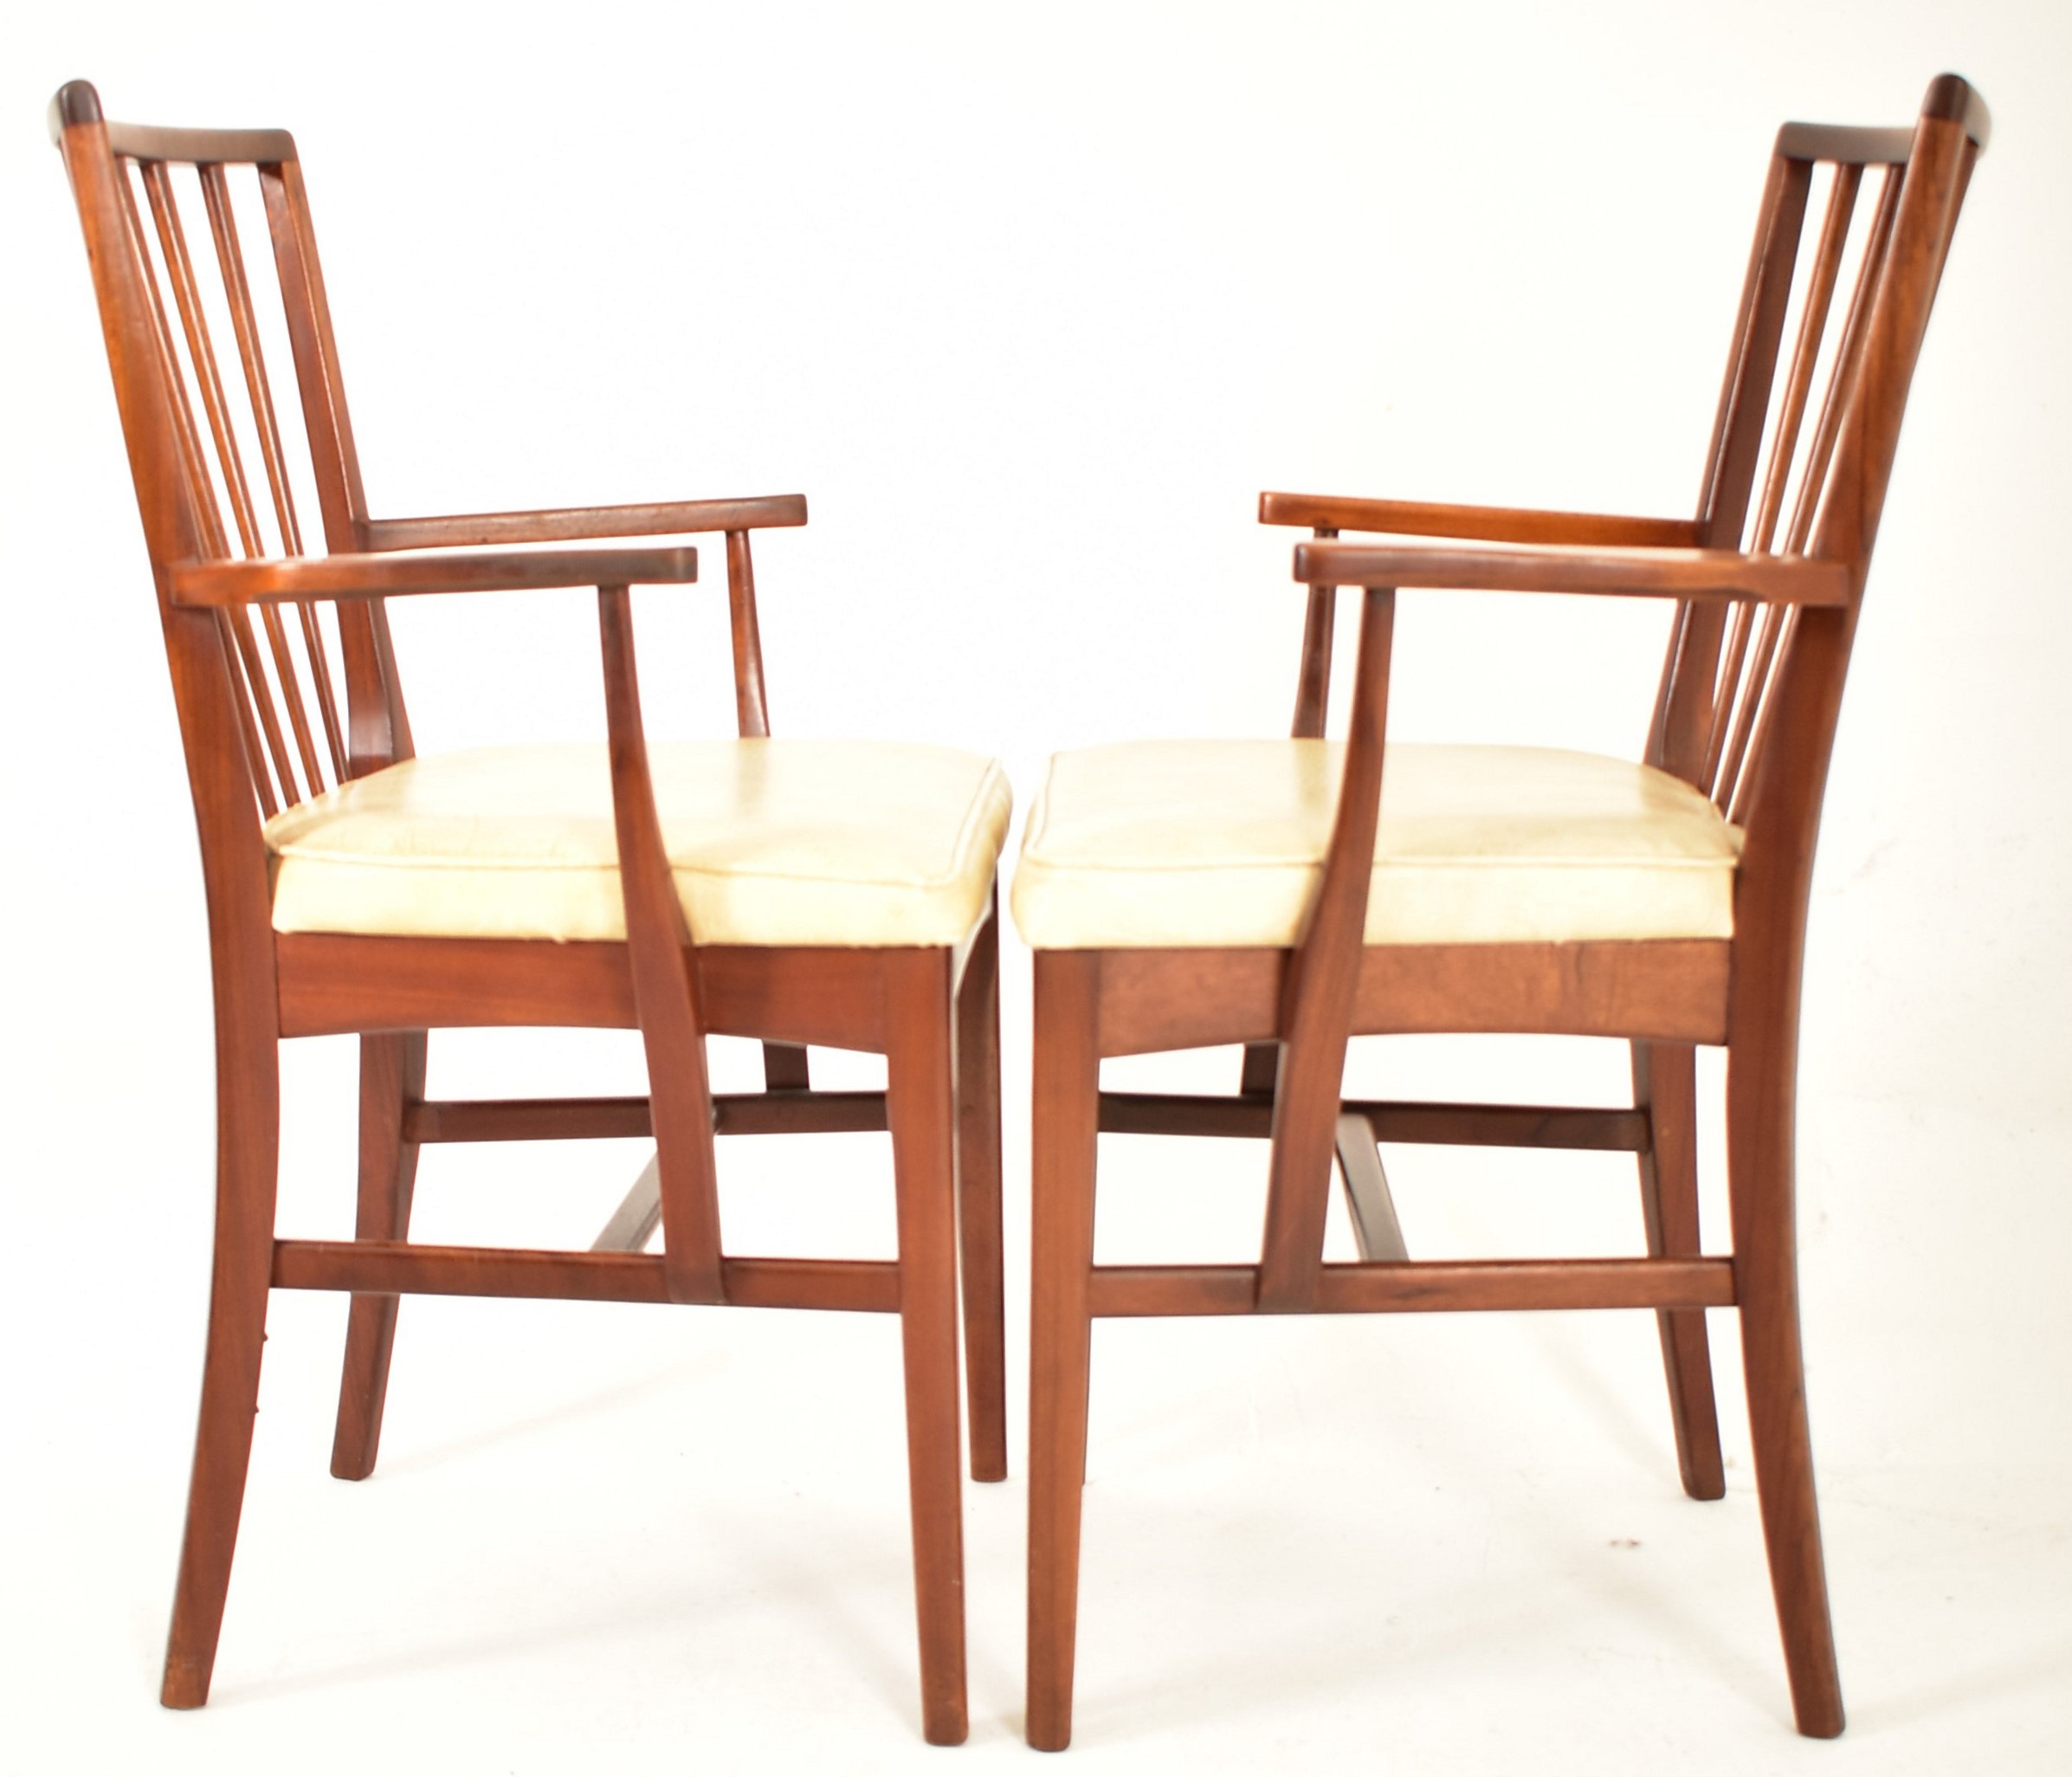 YOUNGERS - MID CENTURY TEAK DINING TABLE AND SIX CHAIRS - Image 5 of 9